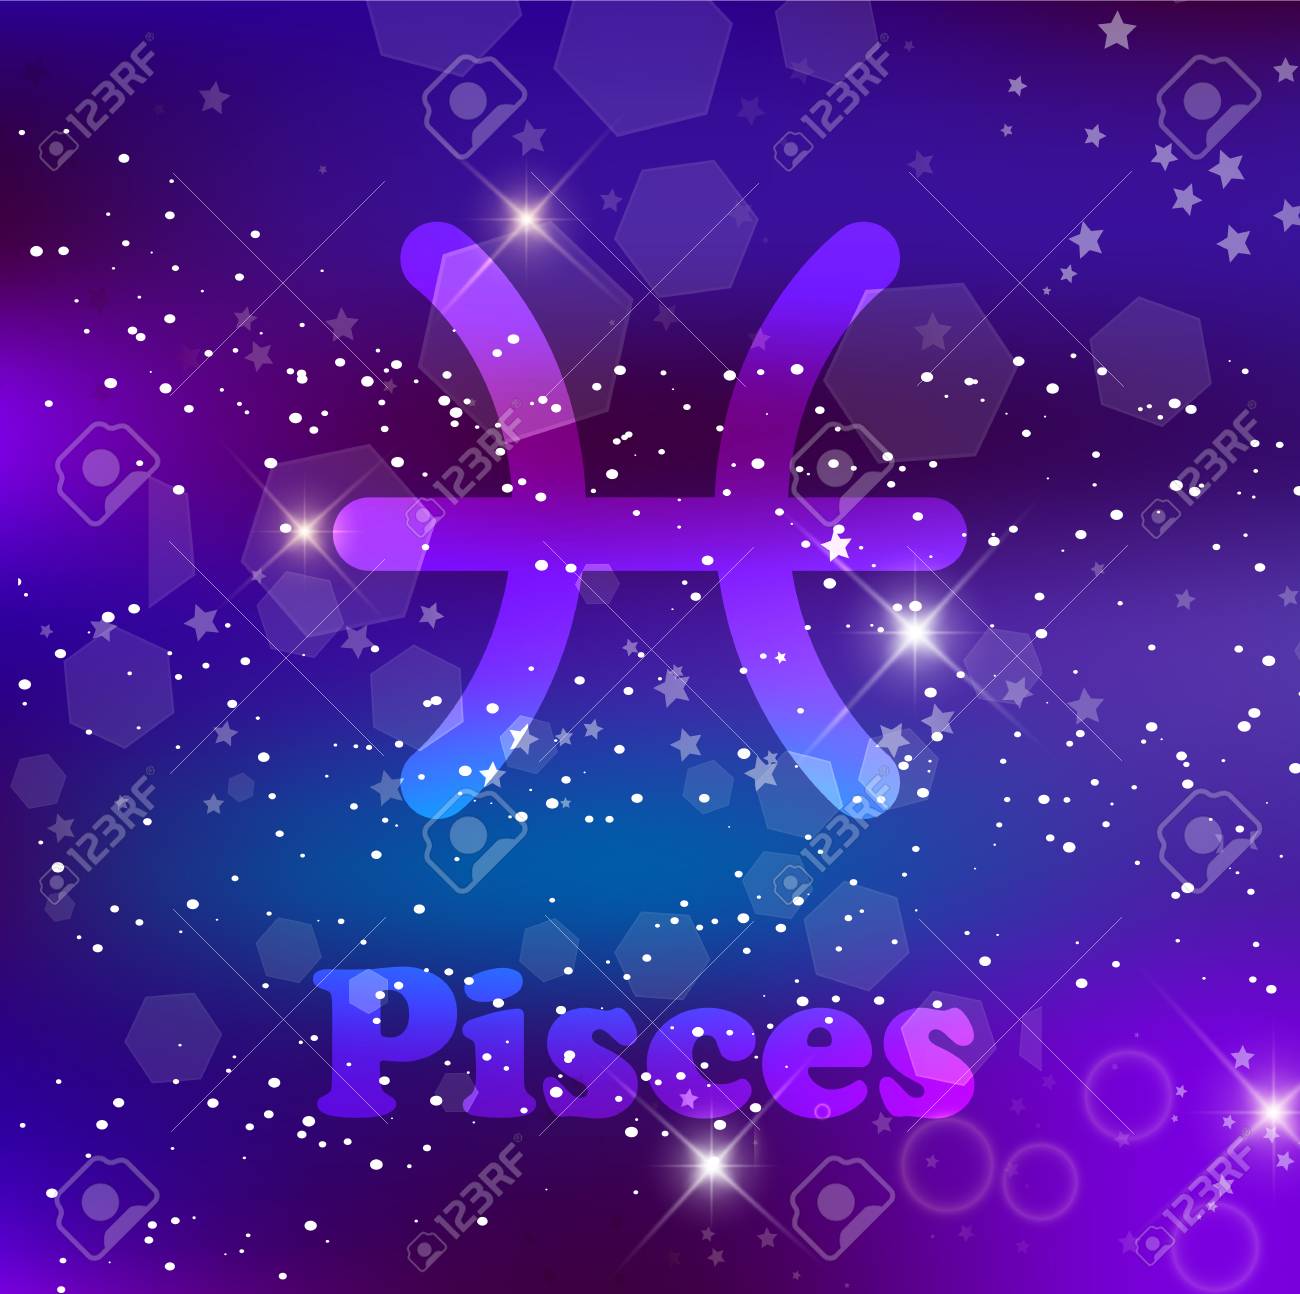 Free download Pisces Zodiac Sign And Constellation On A Cosmic Purple ...